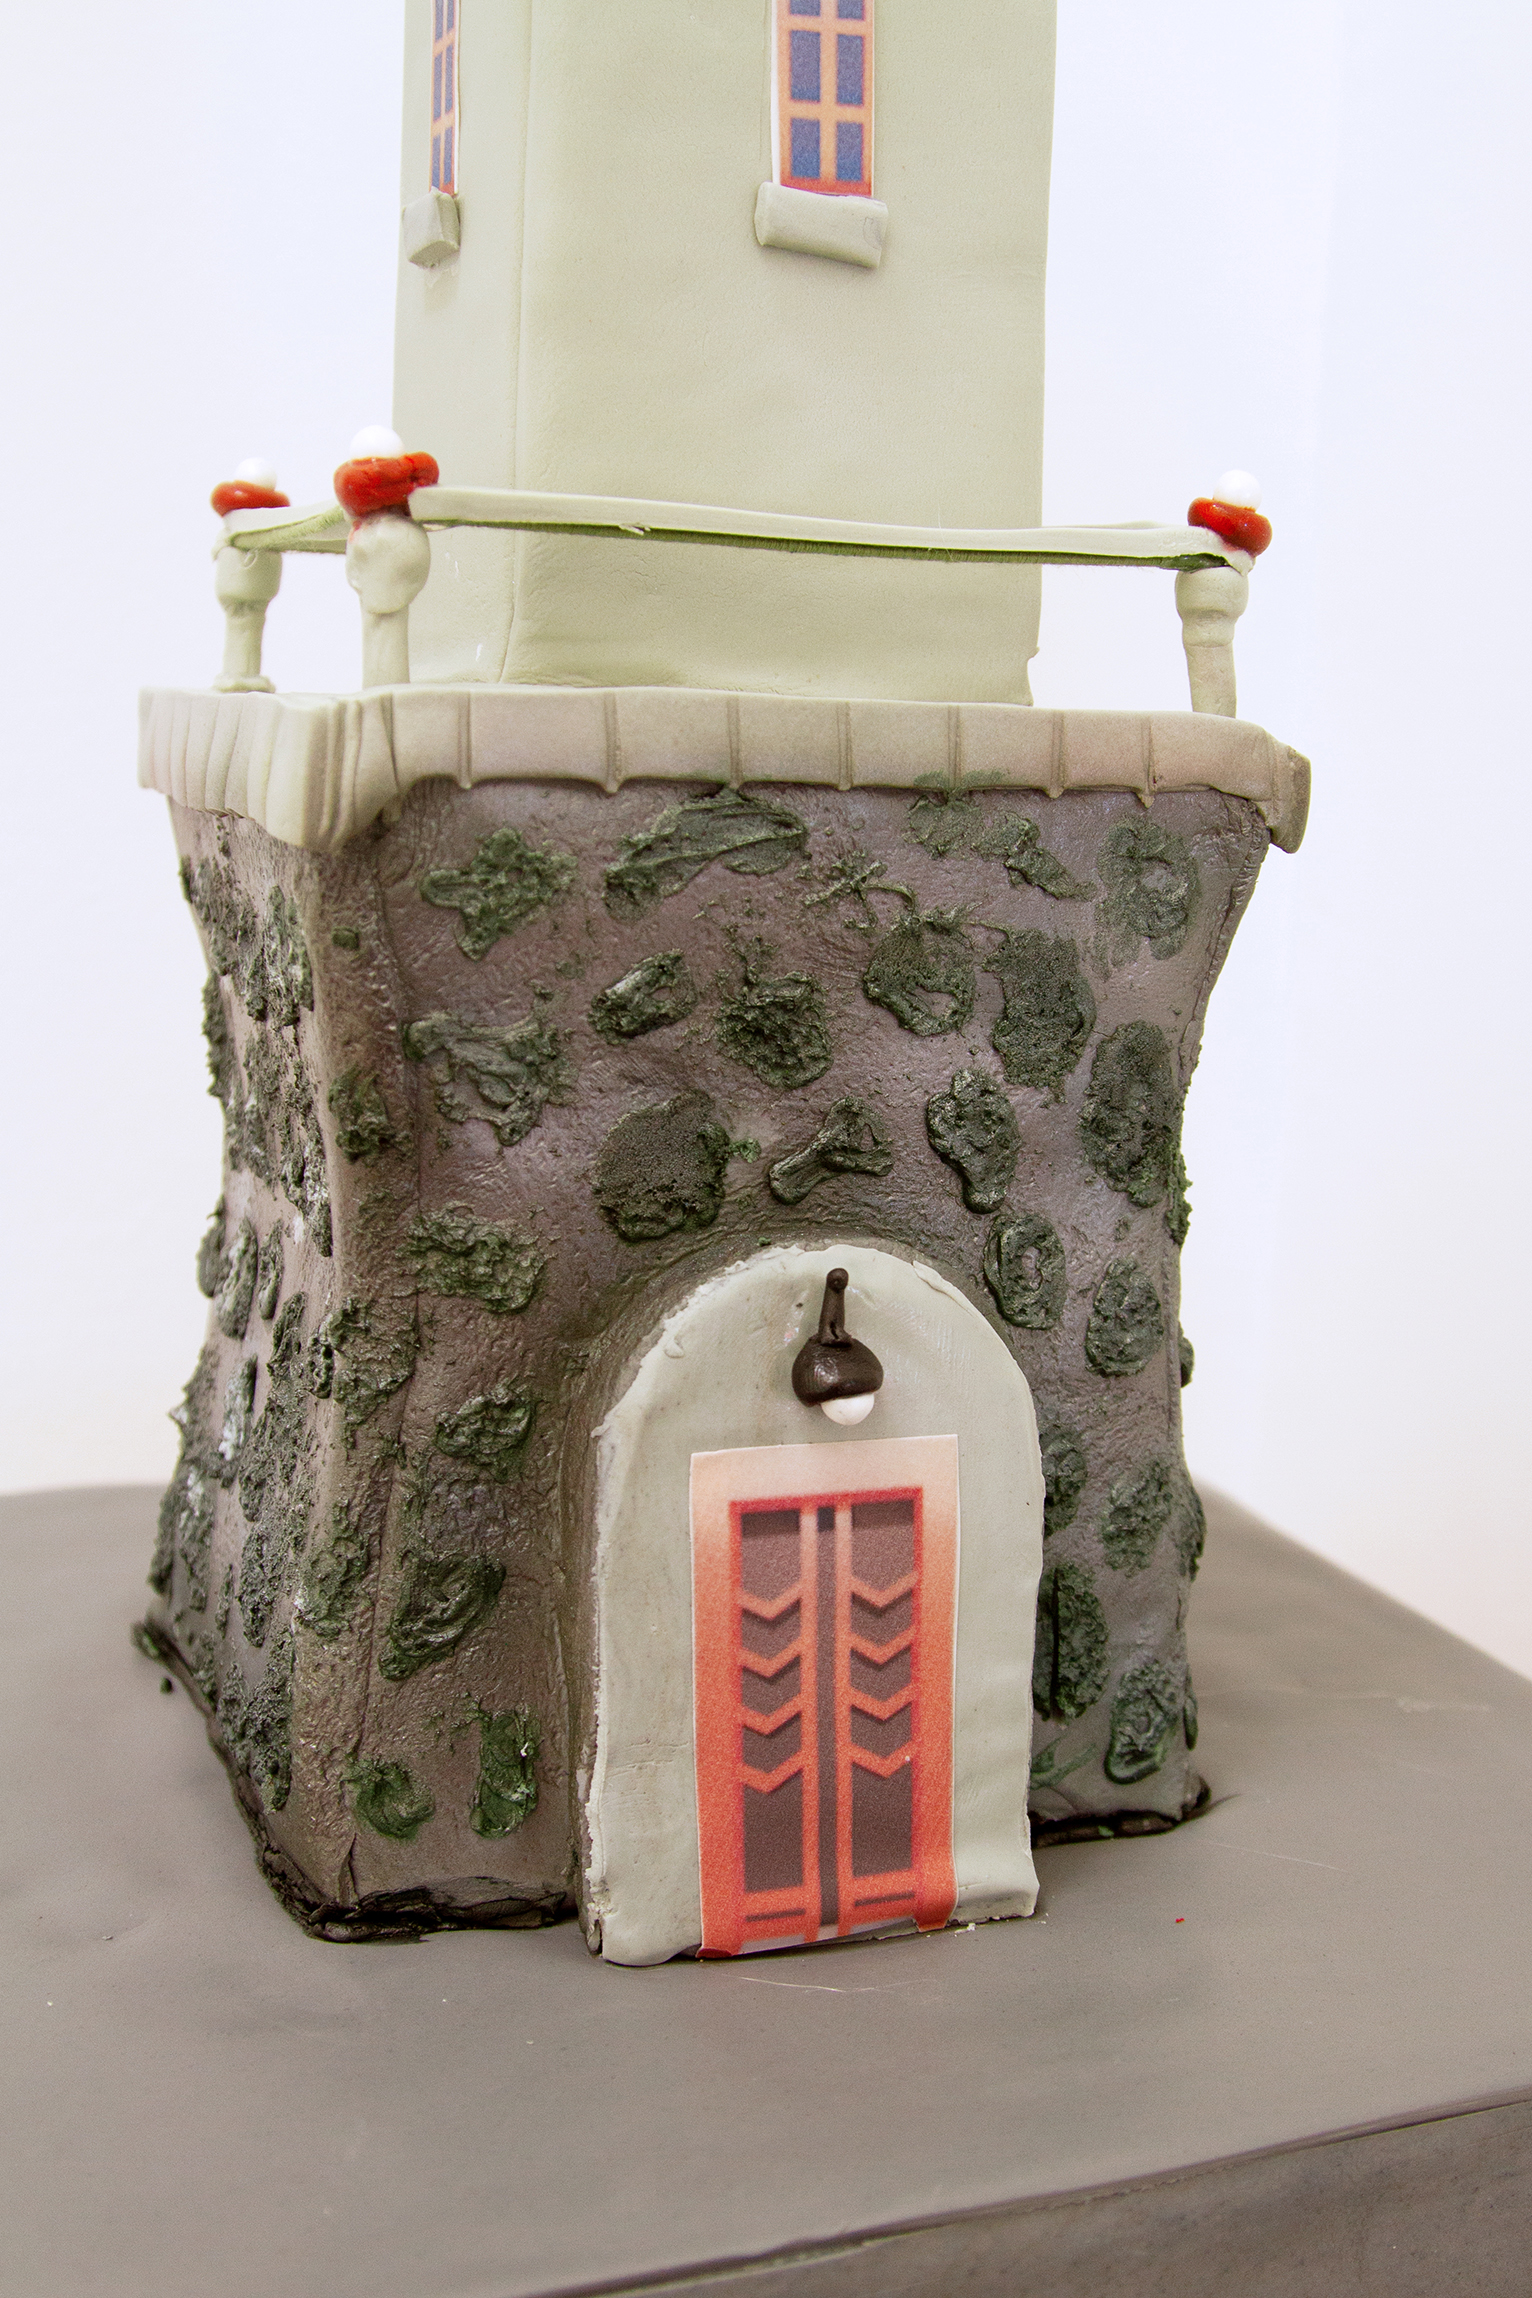 Extreme detail view of the door on tower shaped cake